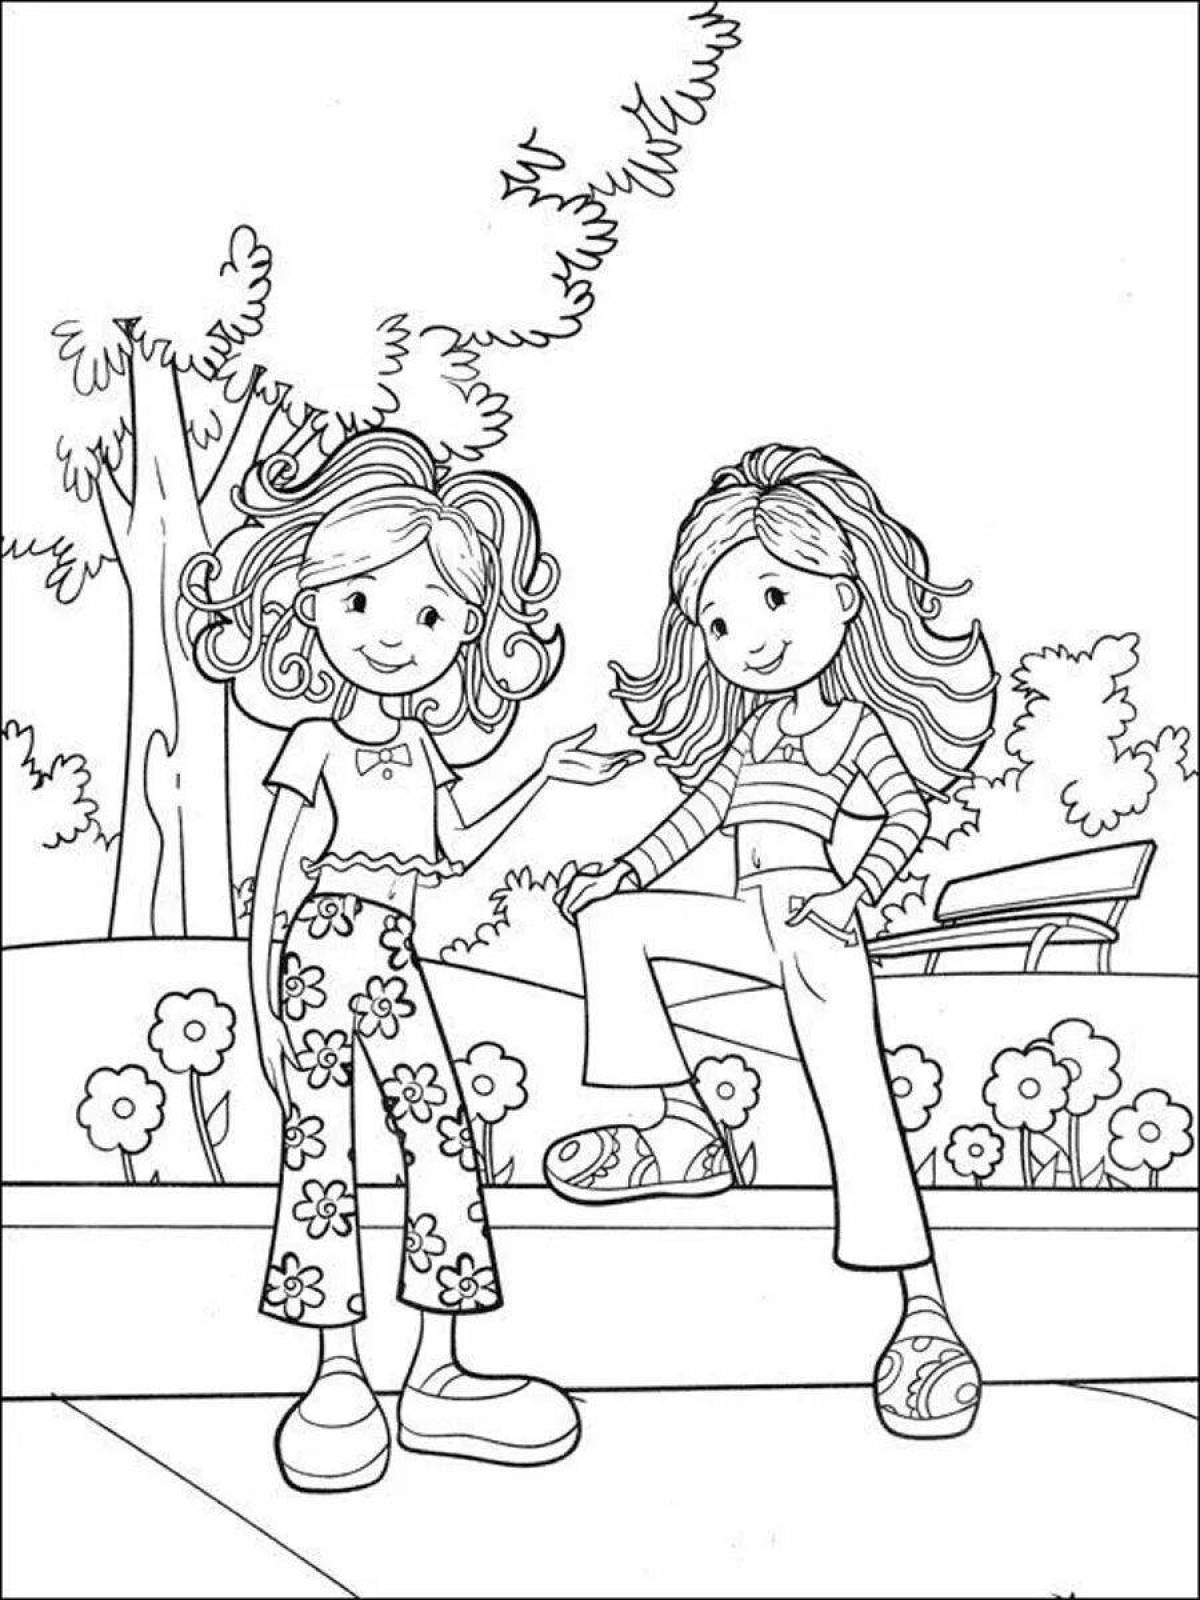 Crazy coloring book for two girls